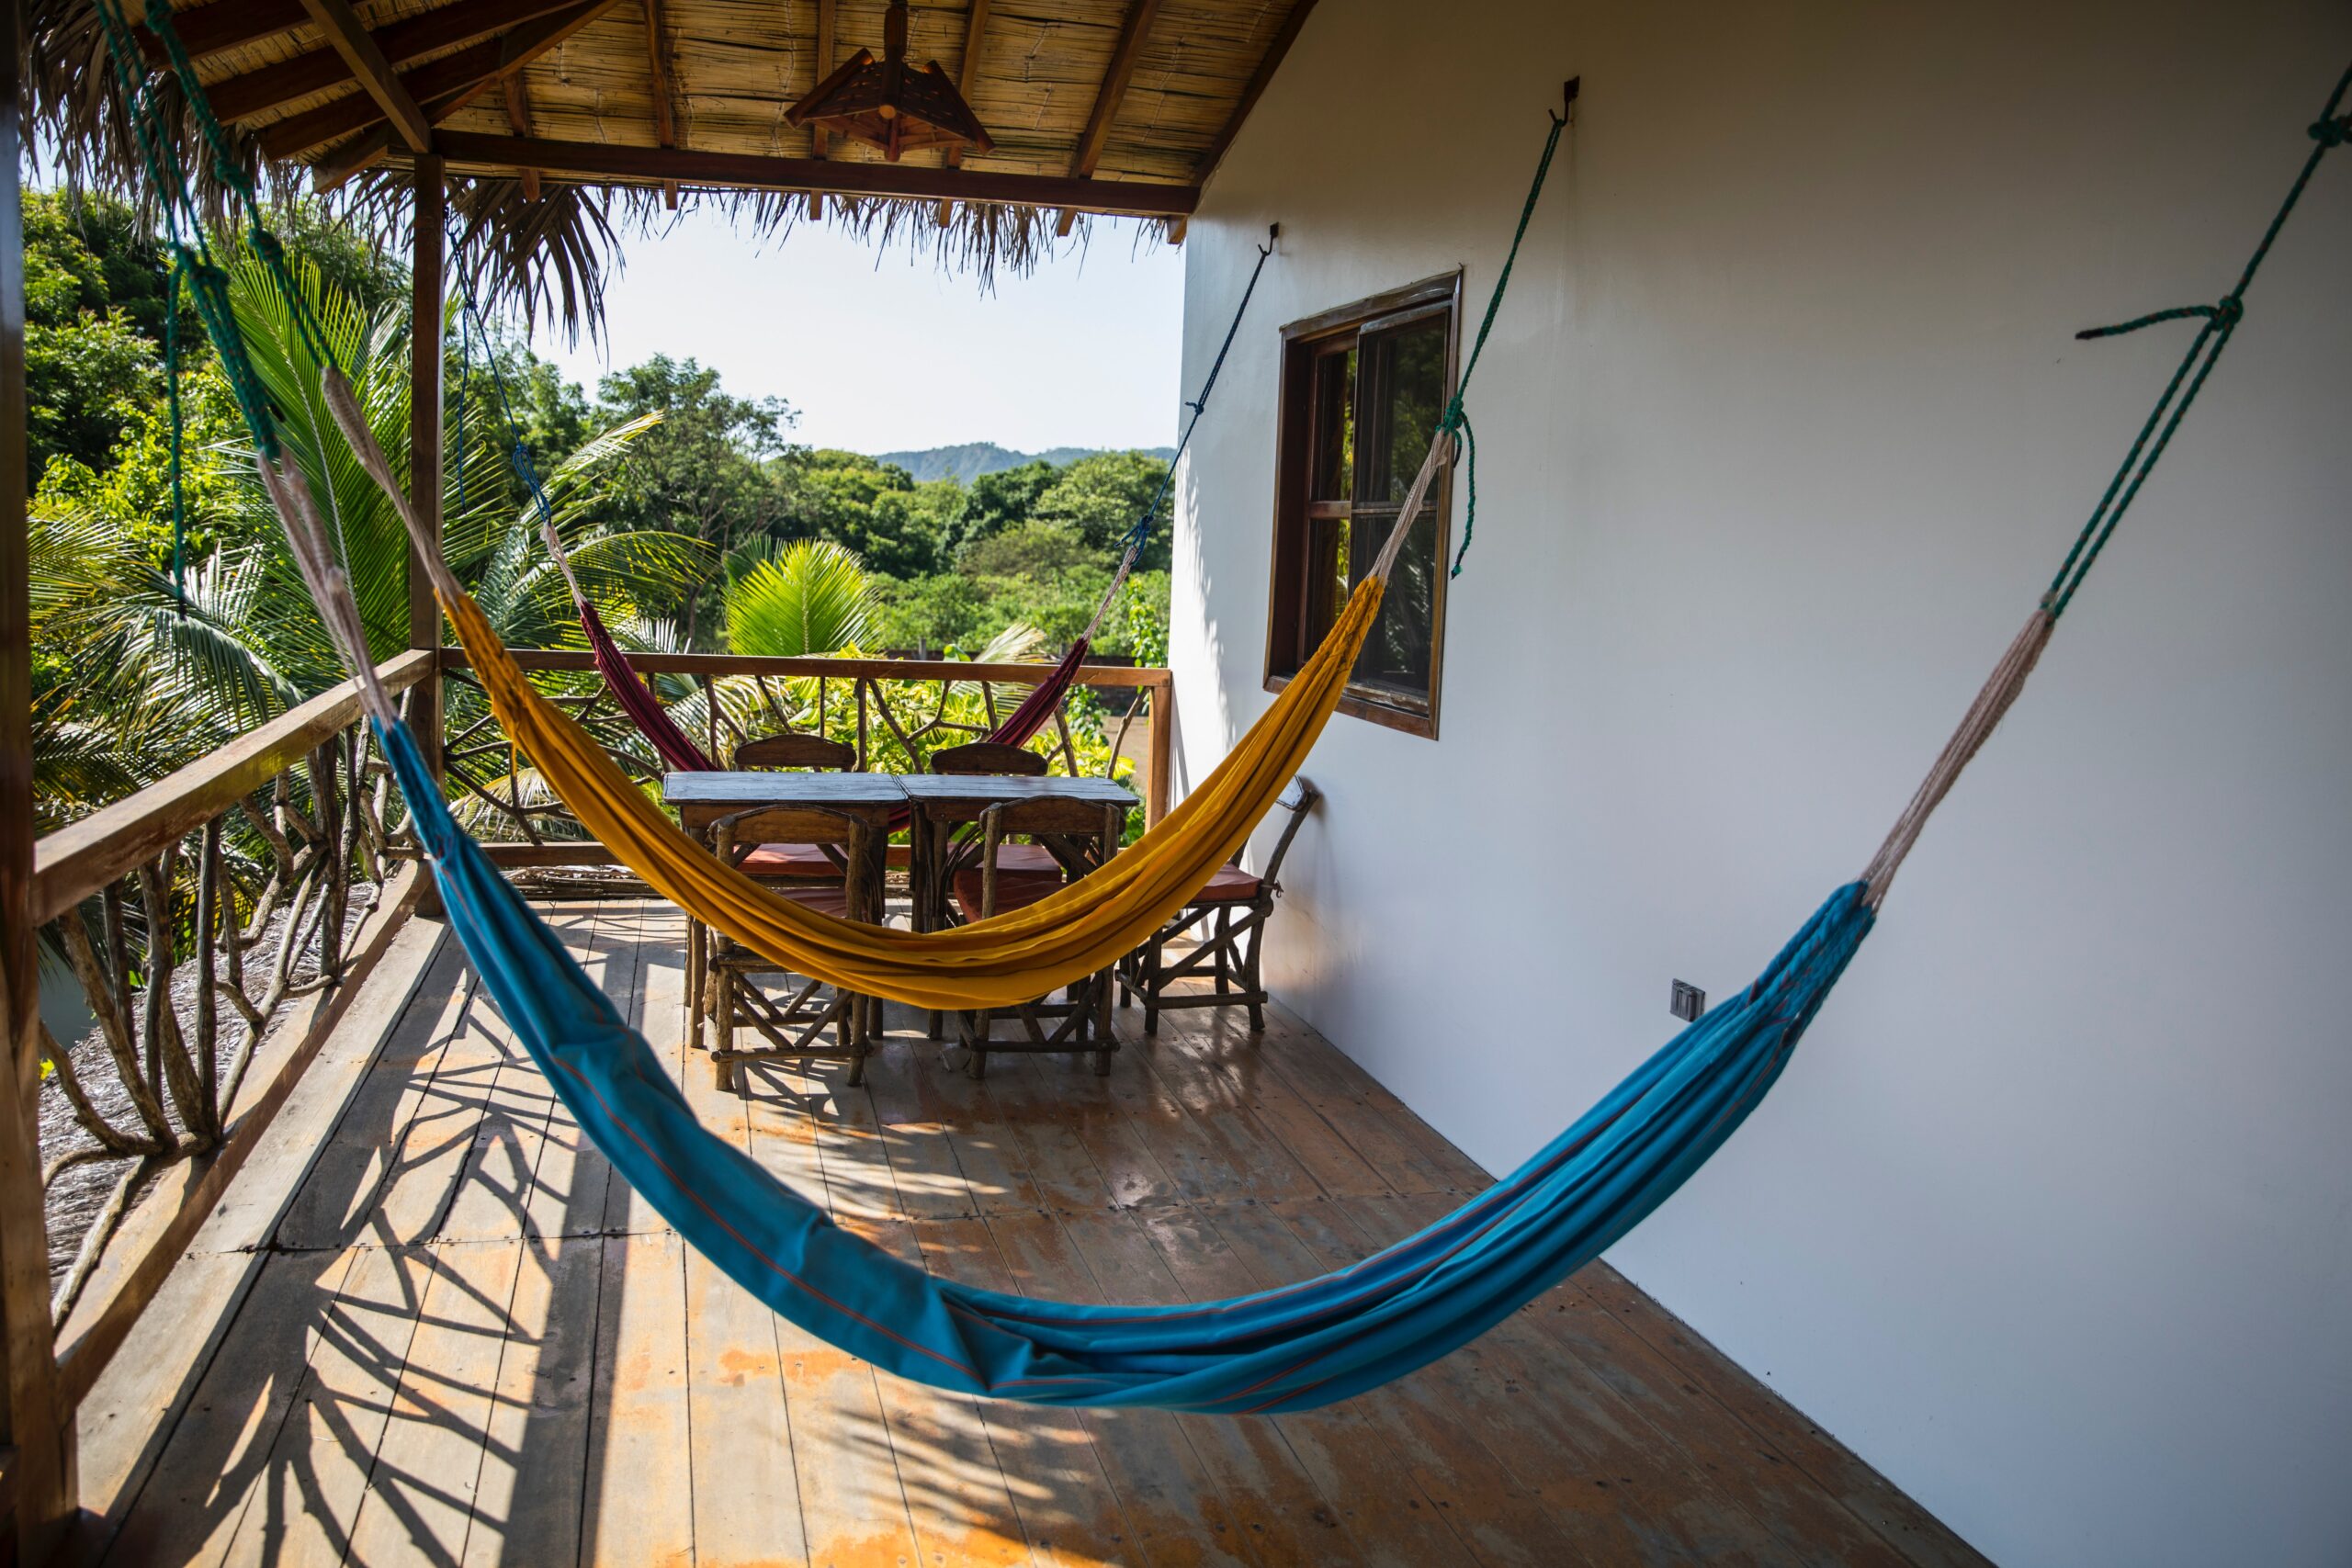 How To Hang A Hammock Without A Tree (6 Ways to Chill Anywhere!)